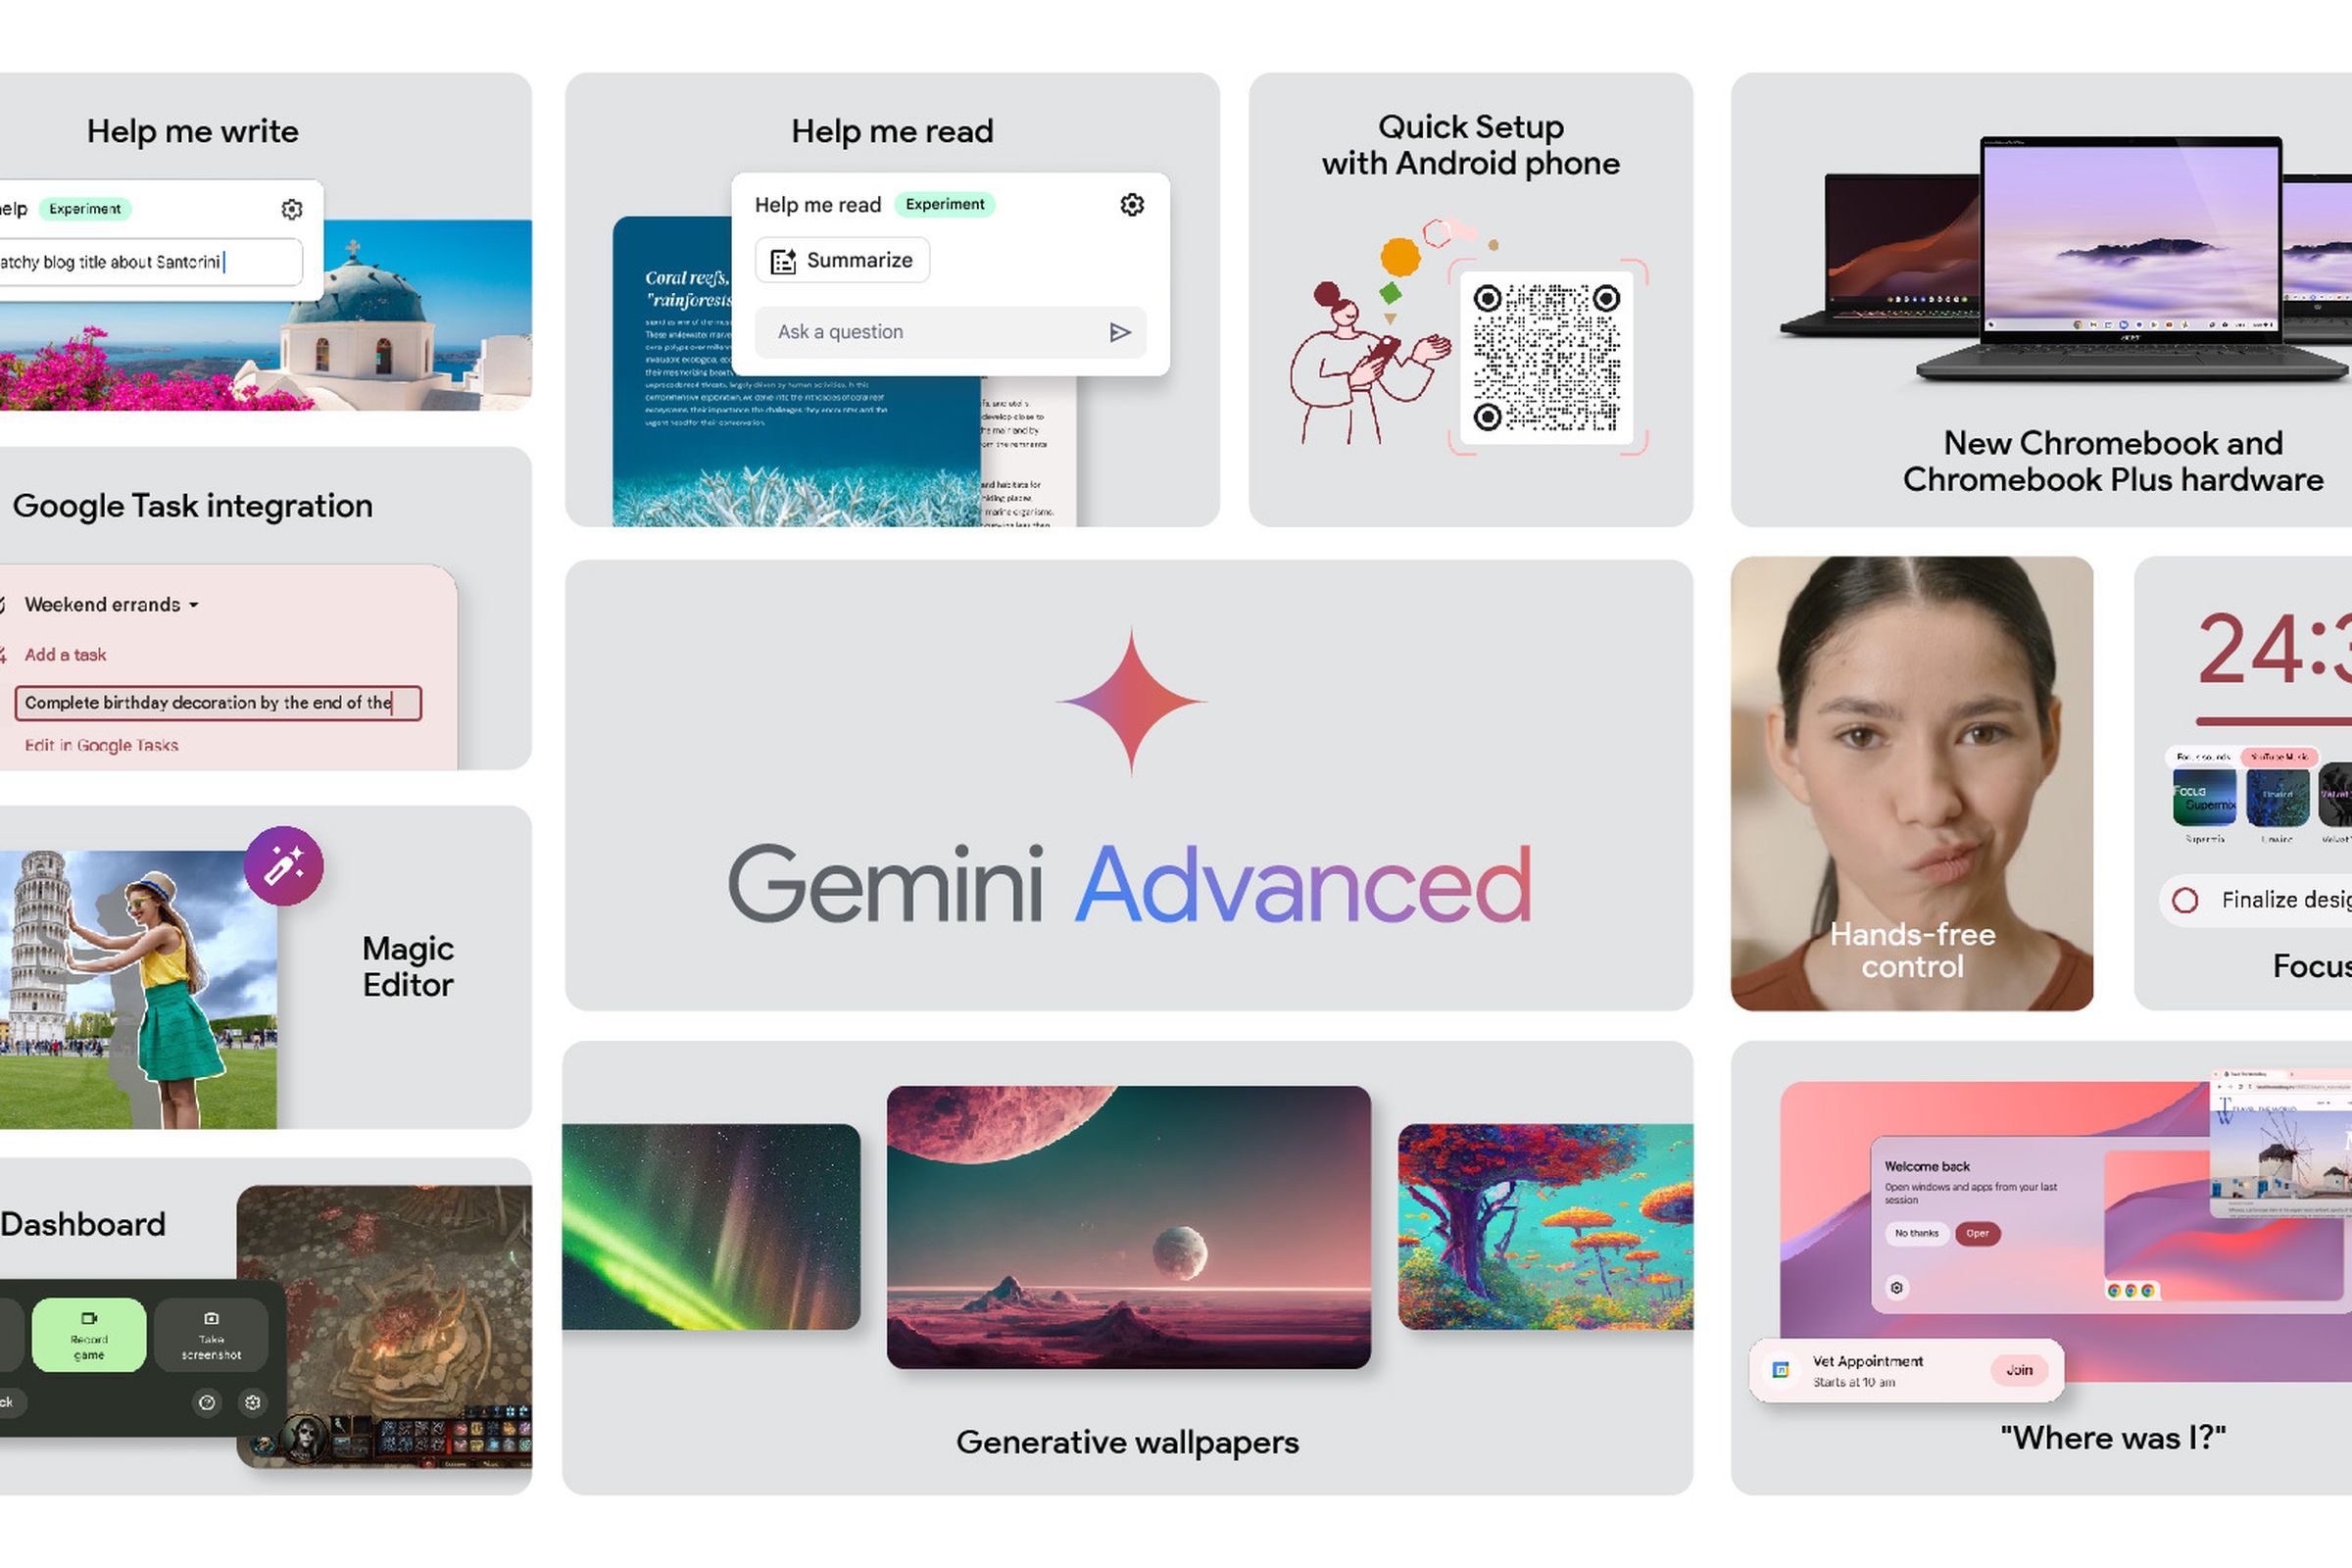 An infographic with several different boxes of information regarding Gemini on Google Chromebook Plus devices.